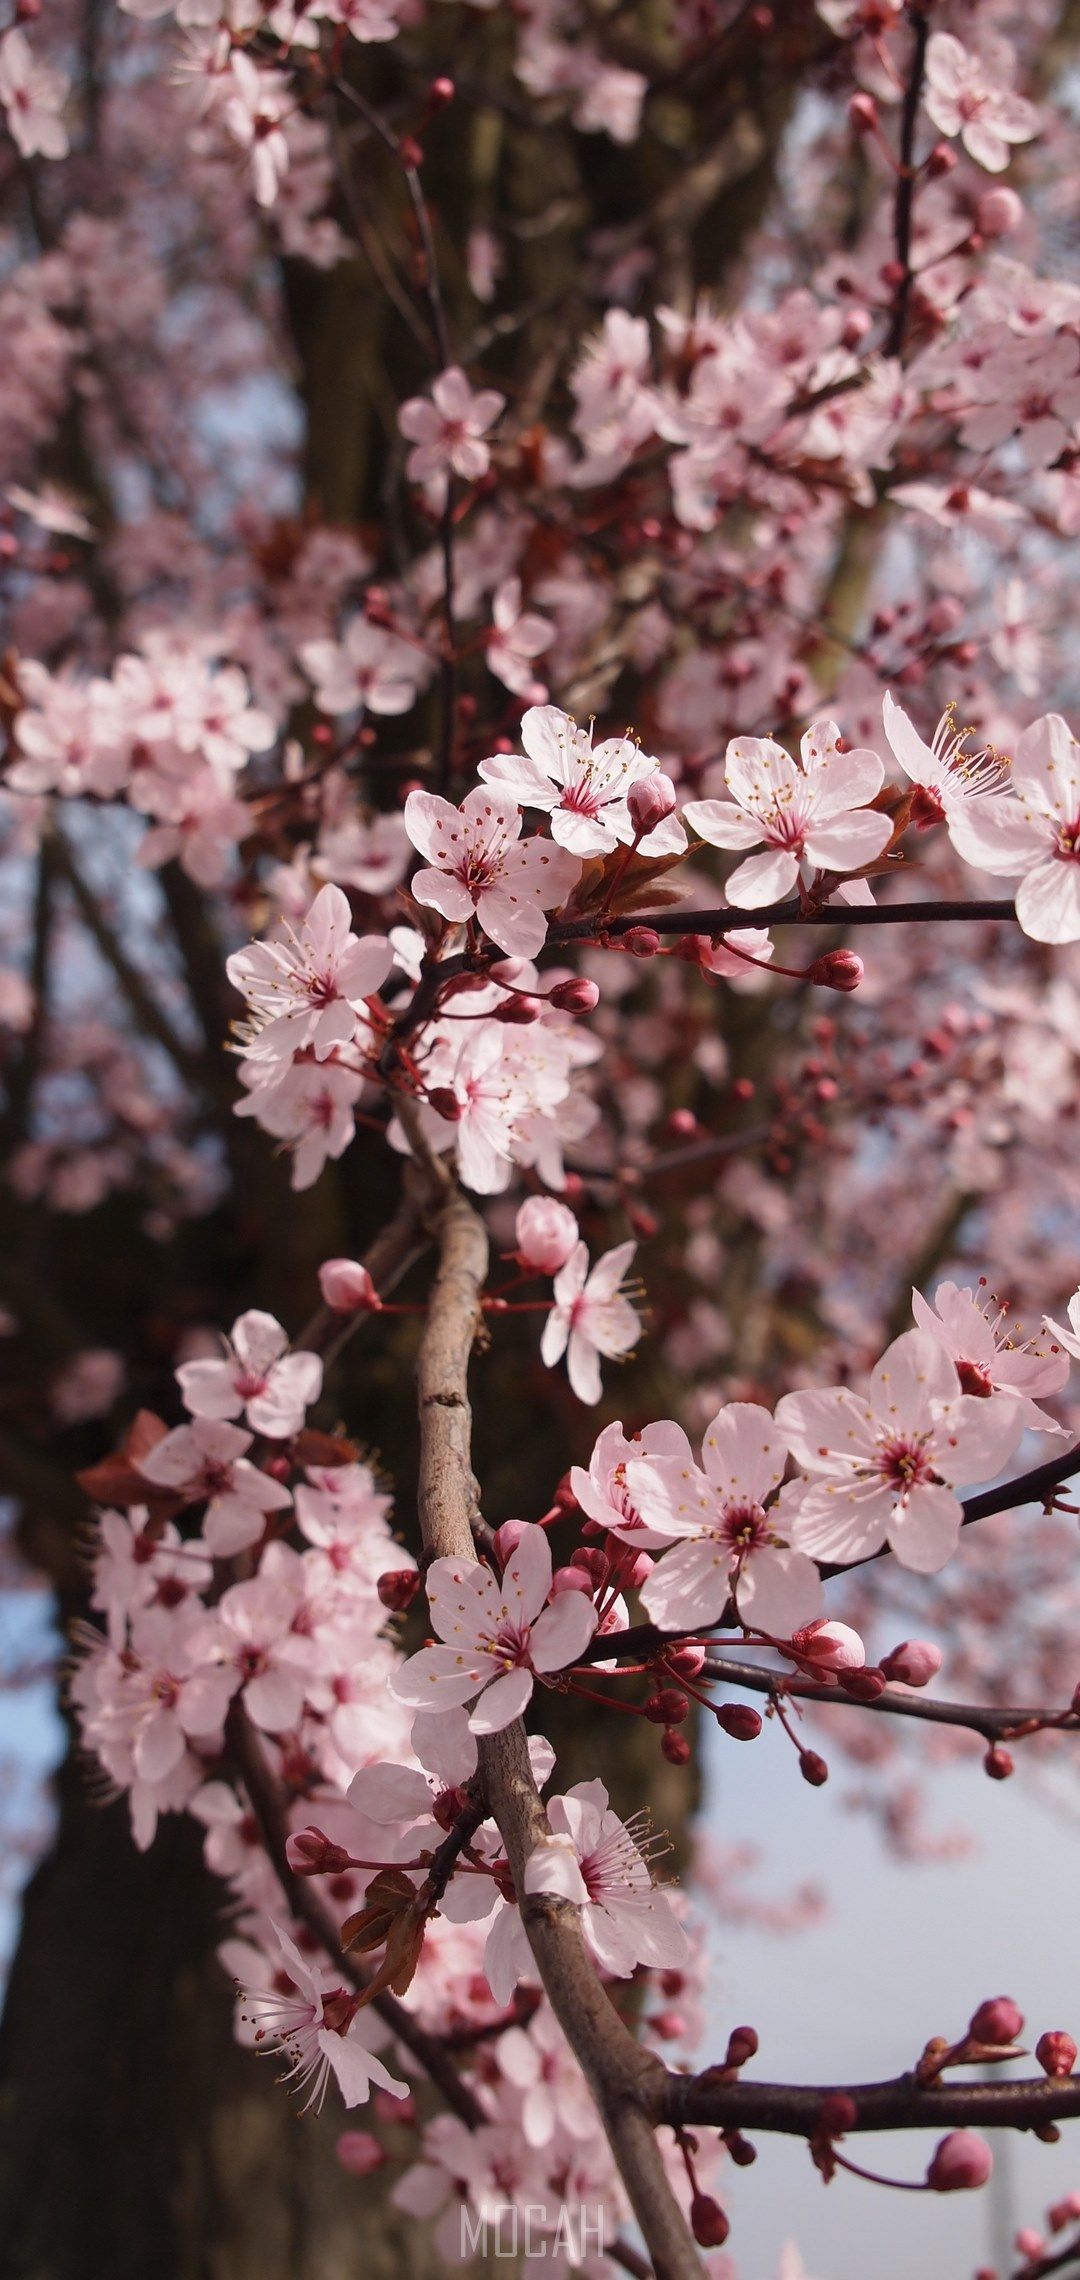 cherry blossom spring flowers tree blooming branch, Nokia 6.1 Plus screensaver, 1080x2280 Gallery HD Wallpaper